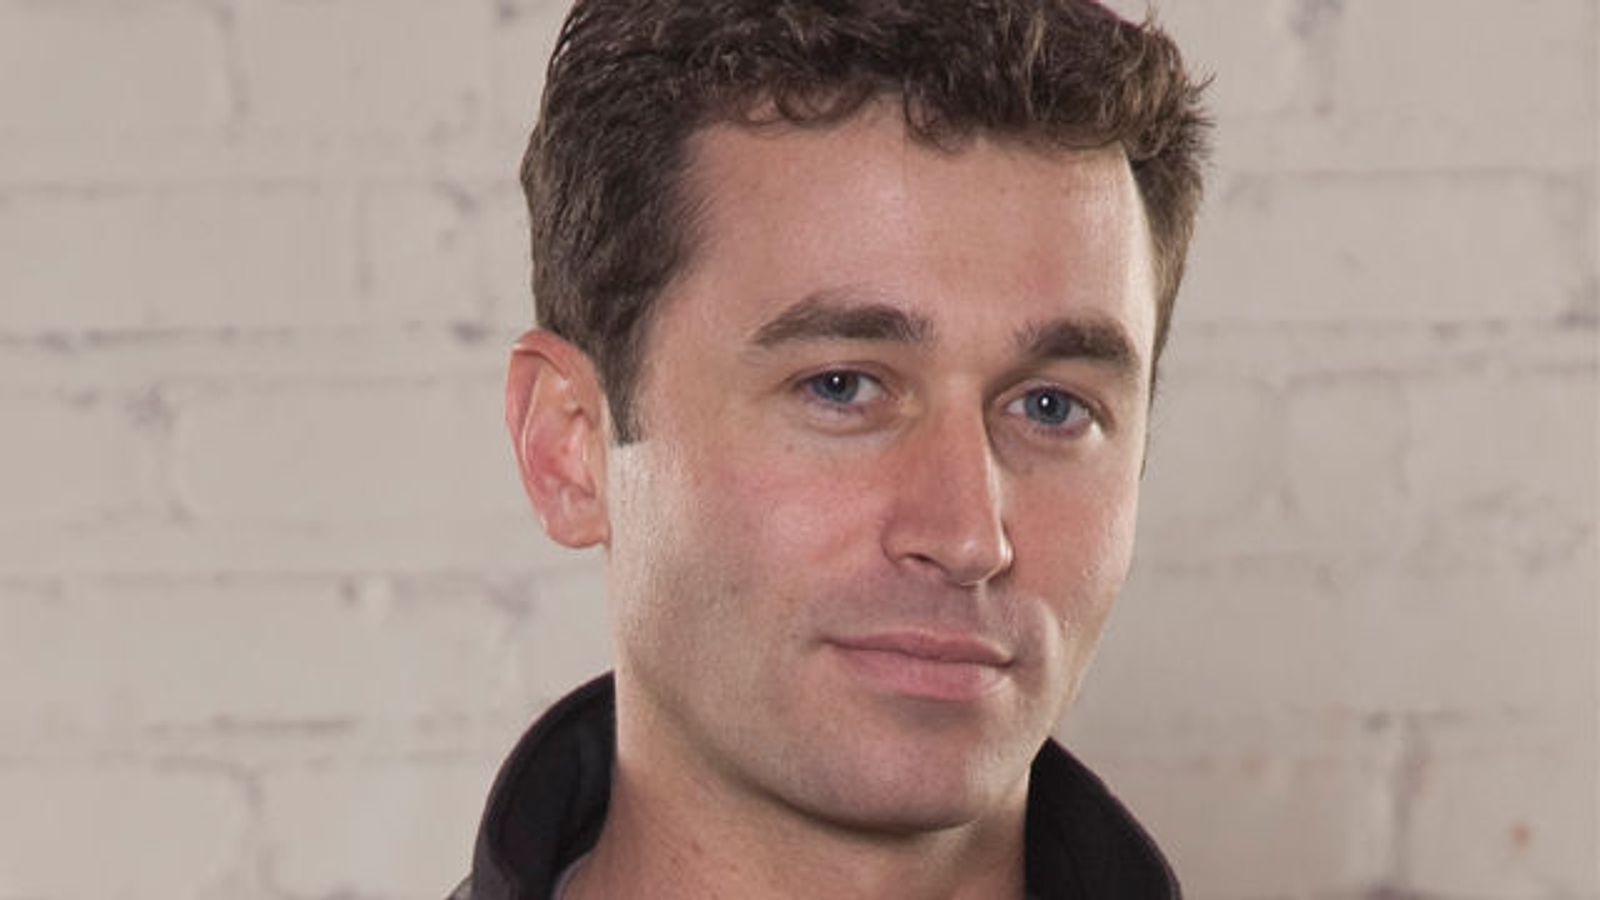 James Deen Joins HotMovies FreedomStreams Tax Day Benefit